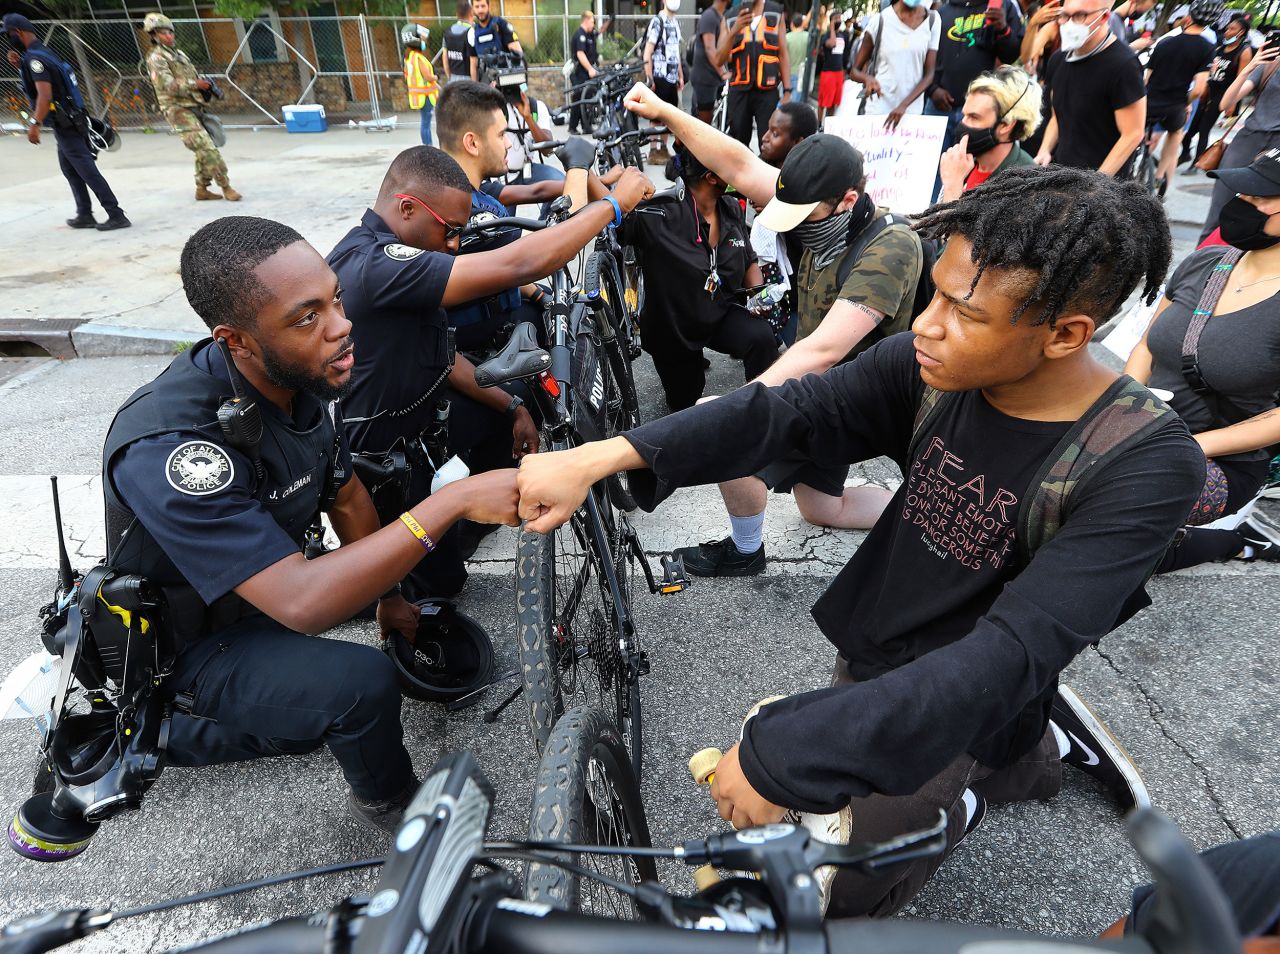 Atlanta Police Officer J. Coleman shares a fist bump with protester Elijah Raffington on June 3. The police bicycle unit was taking a knee with protesters outside the CNN Center.